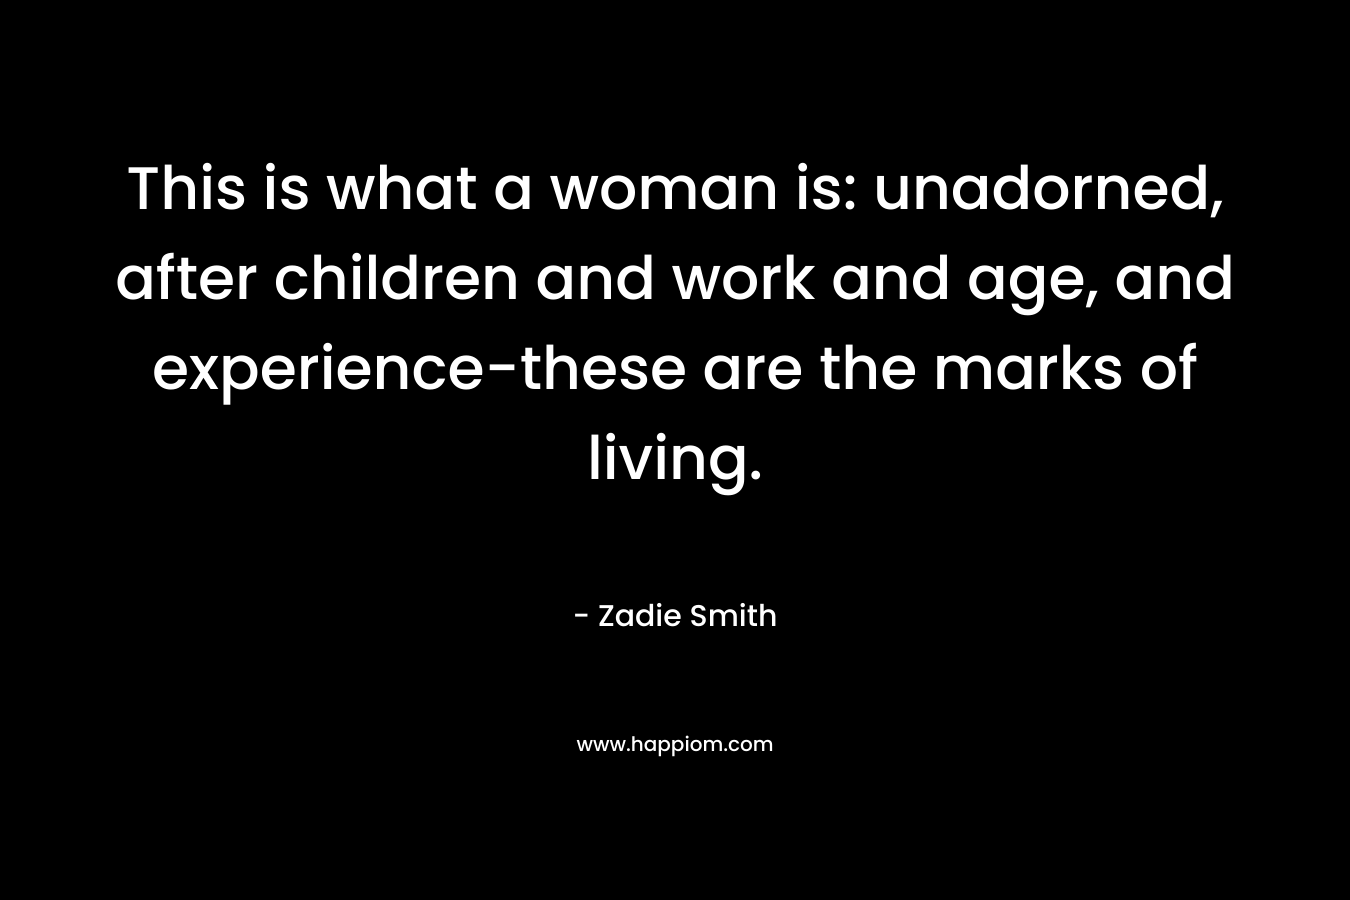 This is what a woman is: unadorned, after children and work and age, and experience-these are the marks of living. – Zadie Smith